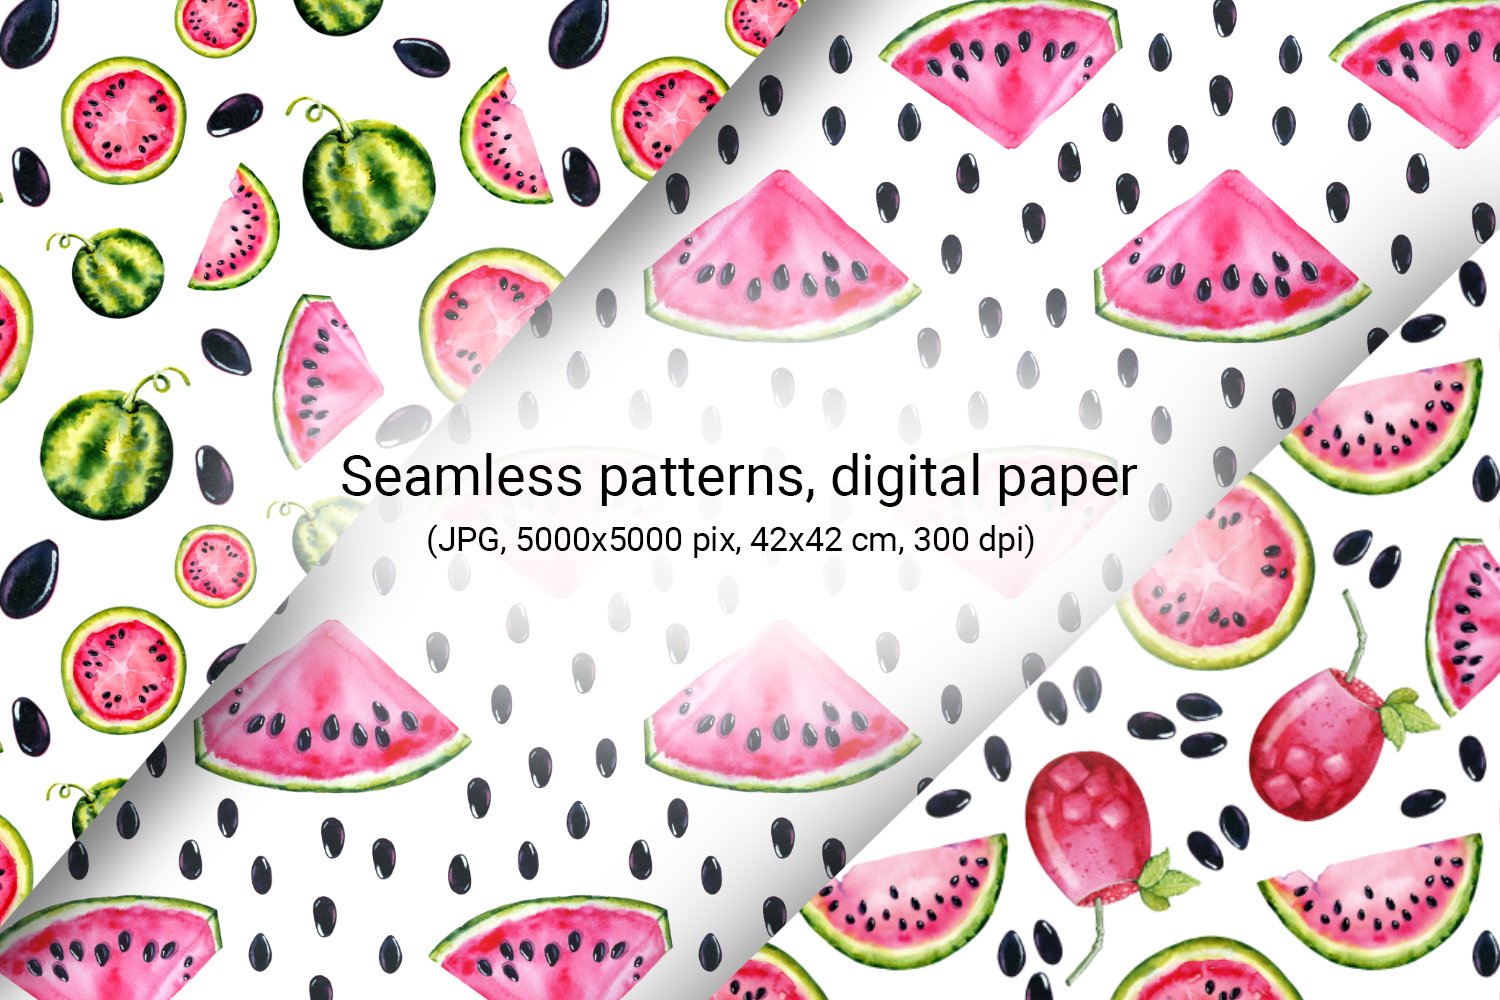 Great patterns for your creative projects.